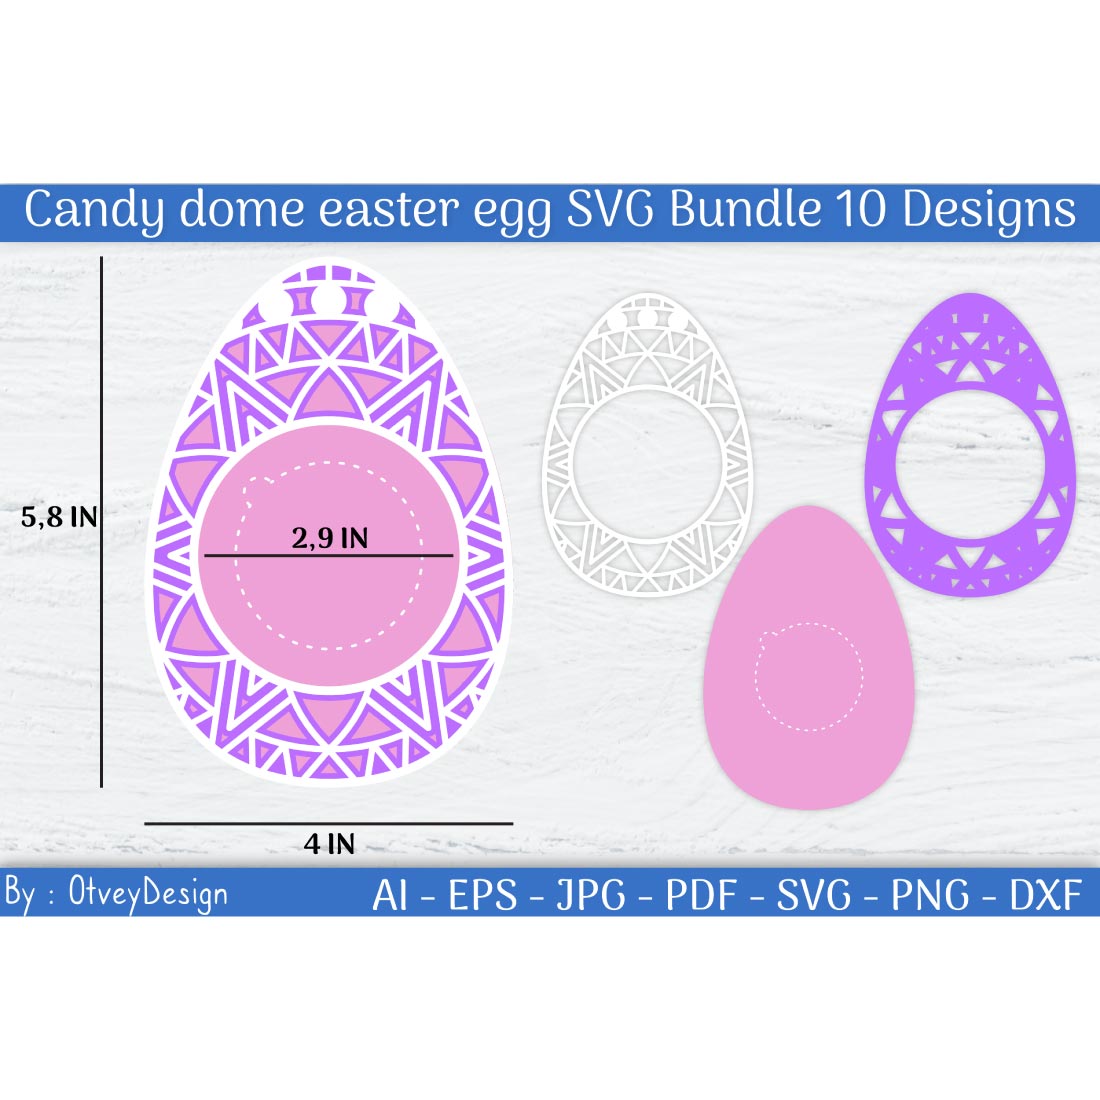 Candy dome easter egg Mandala SVG preview image.